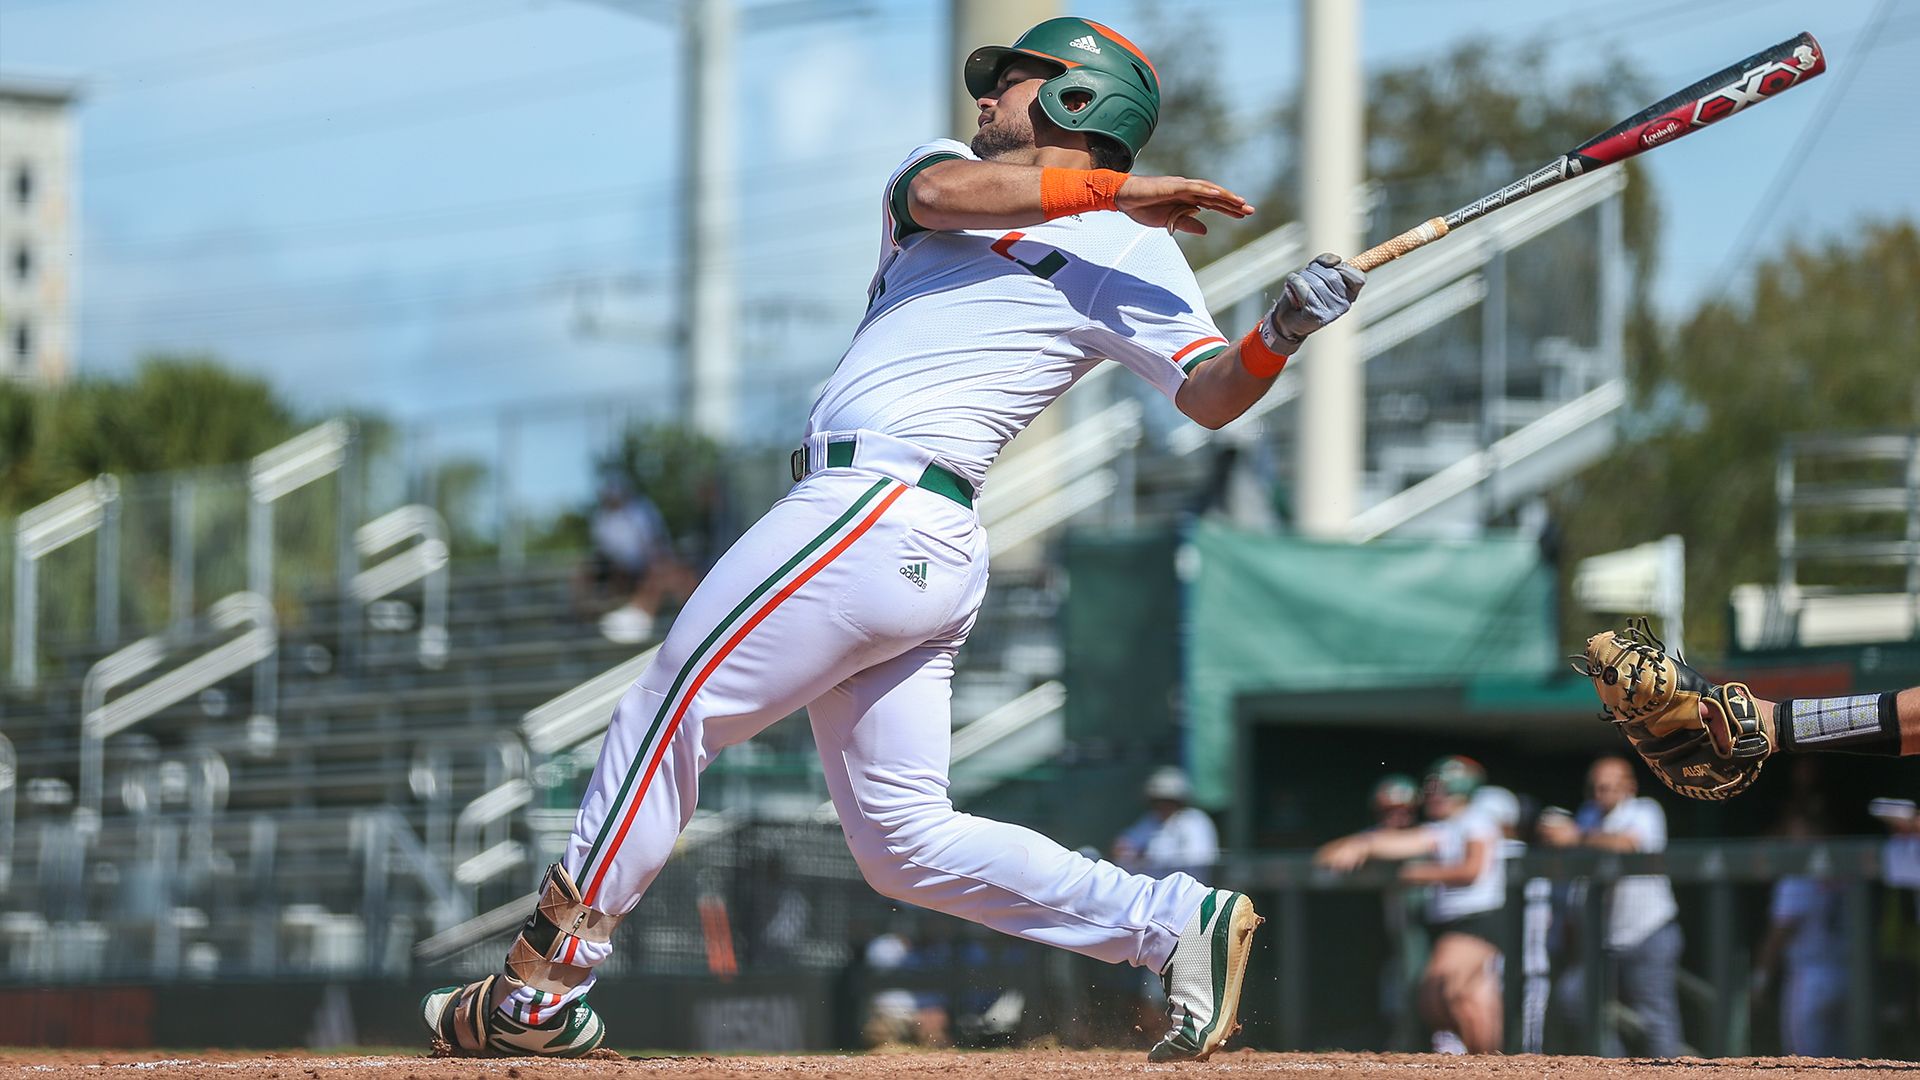 Canes Crush Five Homers in 20-1 Win Over UMBC